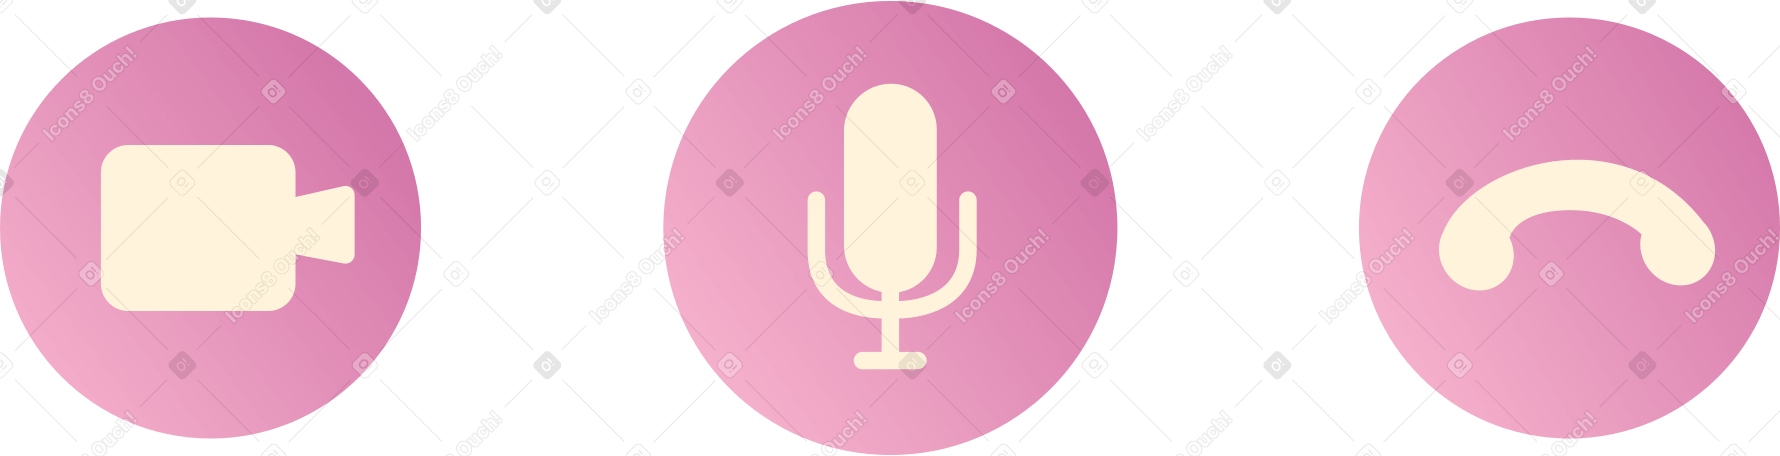 zoom call interface Illustration in PNG, SVG